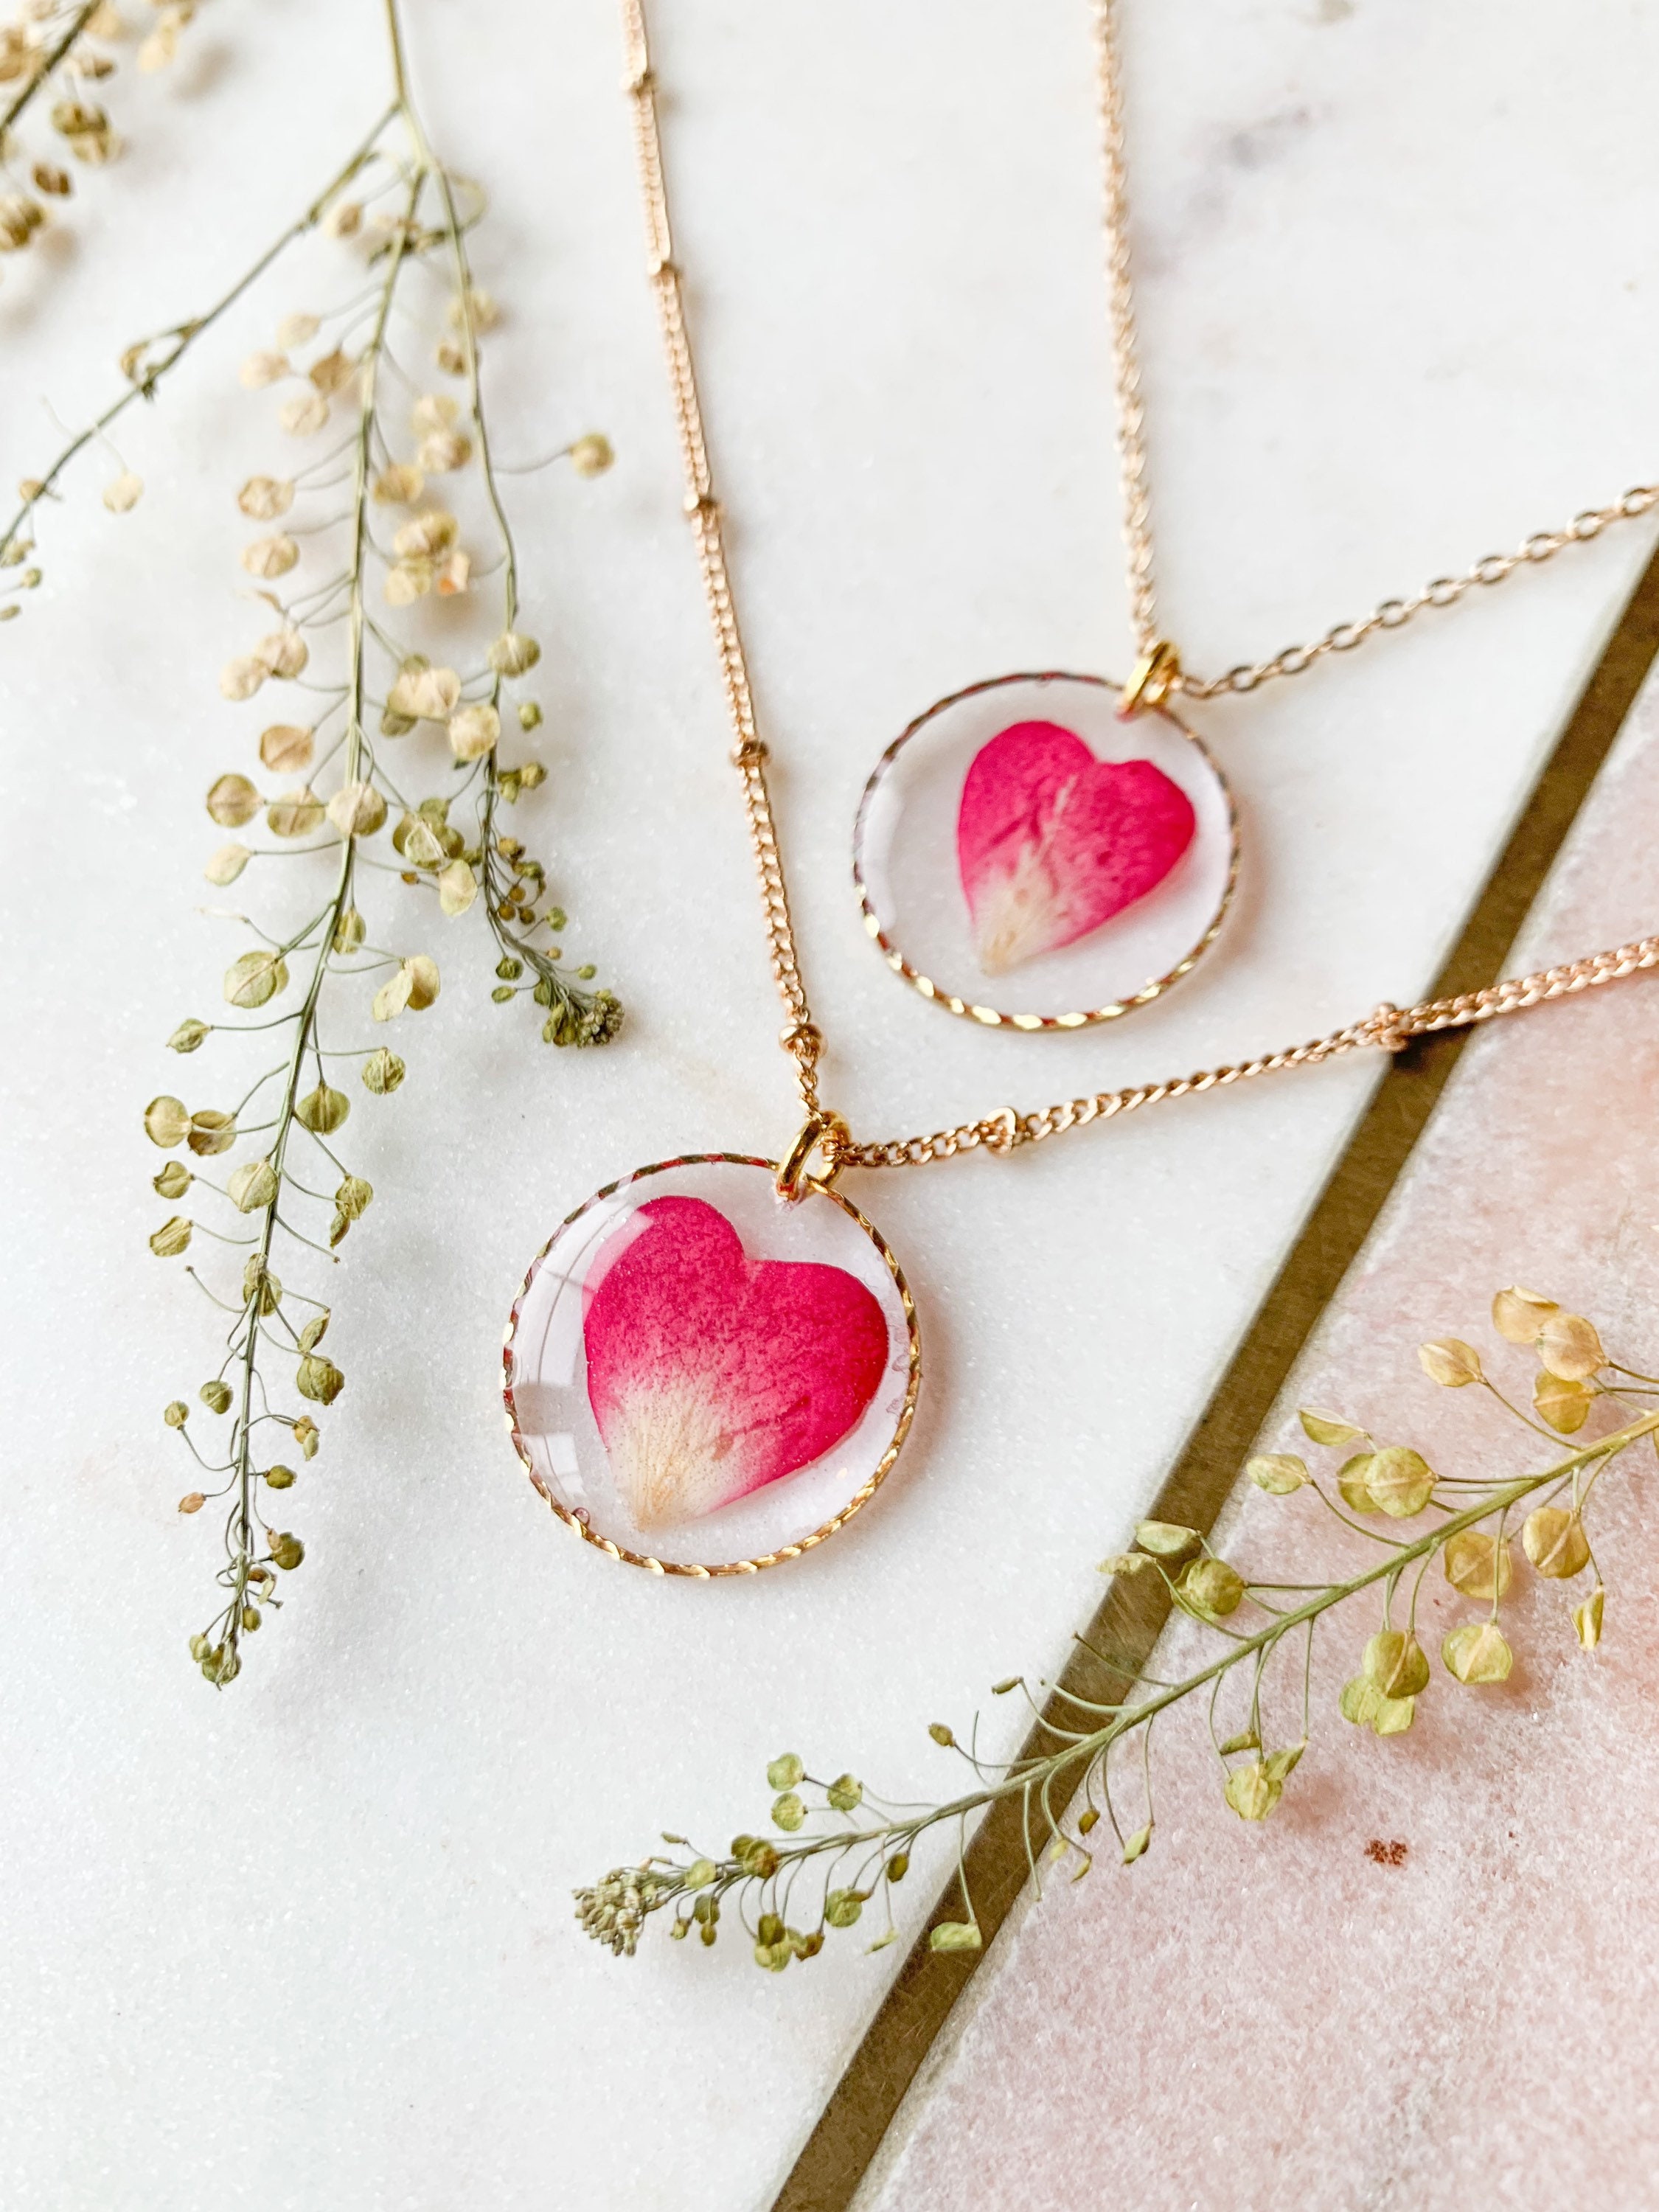 Preserved Wild Flower Rose Heart Pendant Necklace On 22K Gold Plated Fine Chain/Boho Chic Pressed Flowers Jewellery Floral